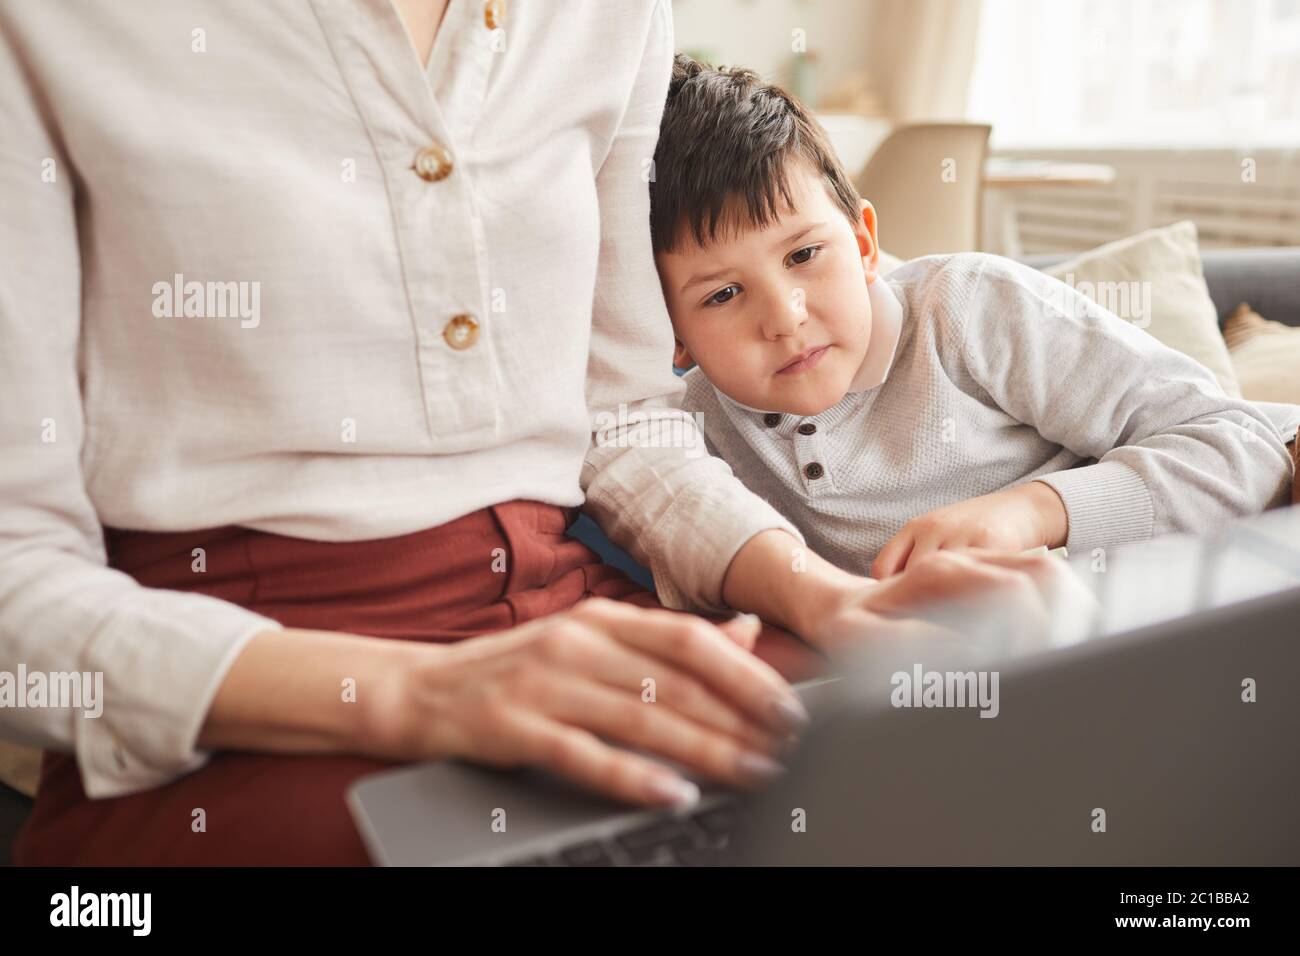 Close up portrait of cute boy looking at laptop screen while studying at home with mother helping him in cozy interior, copy space Stock Photo